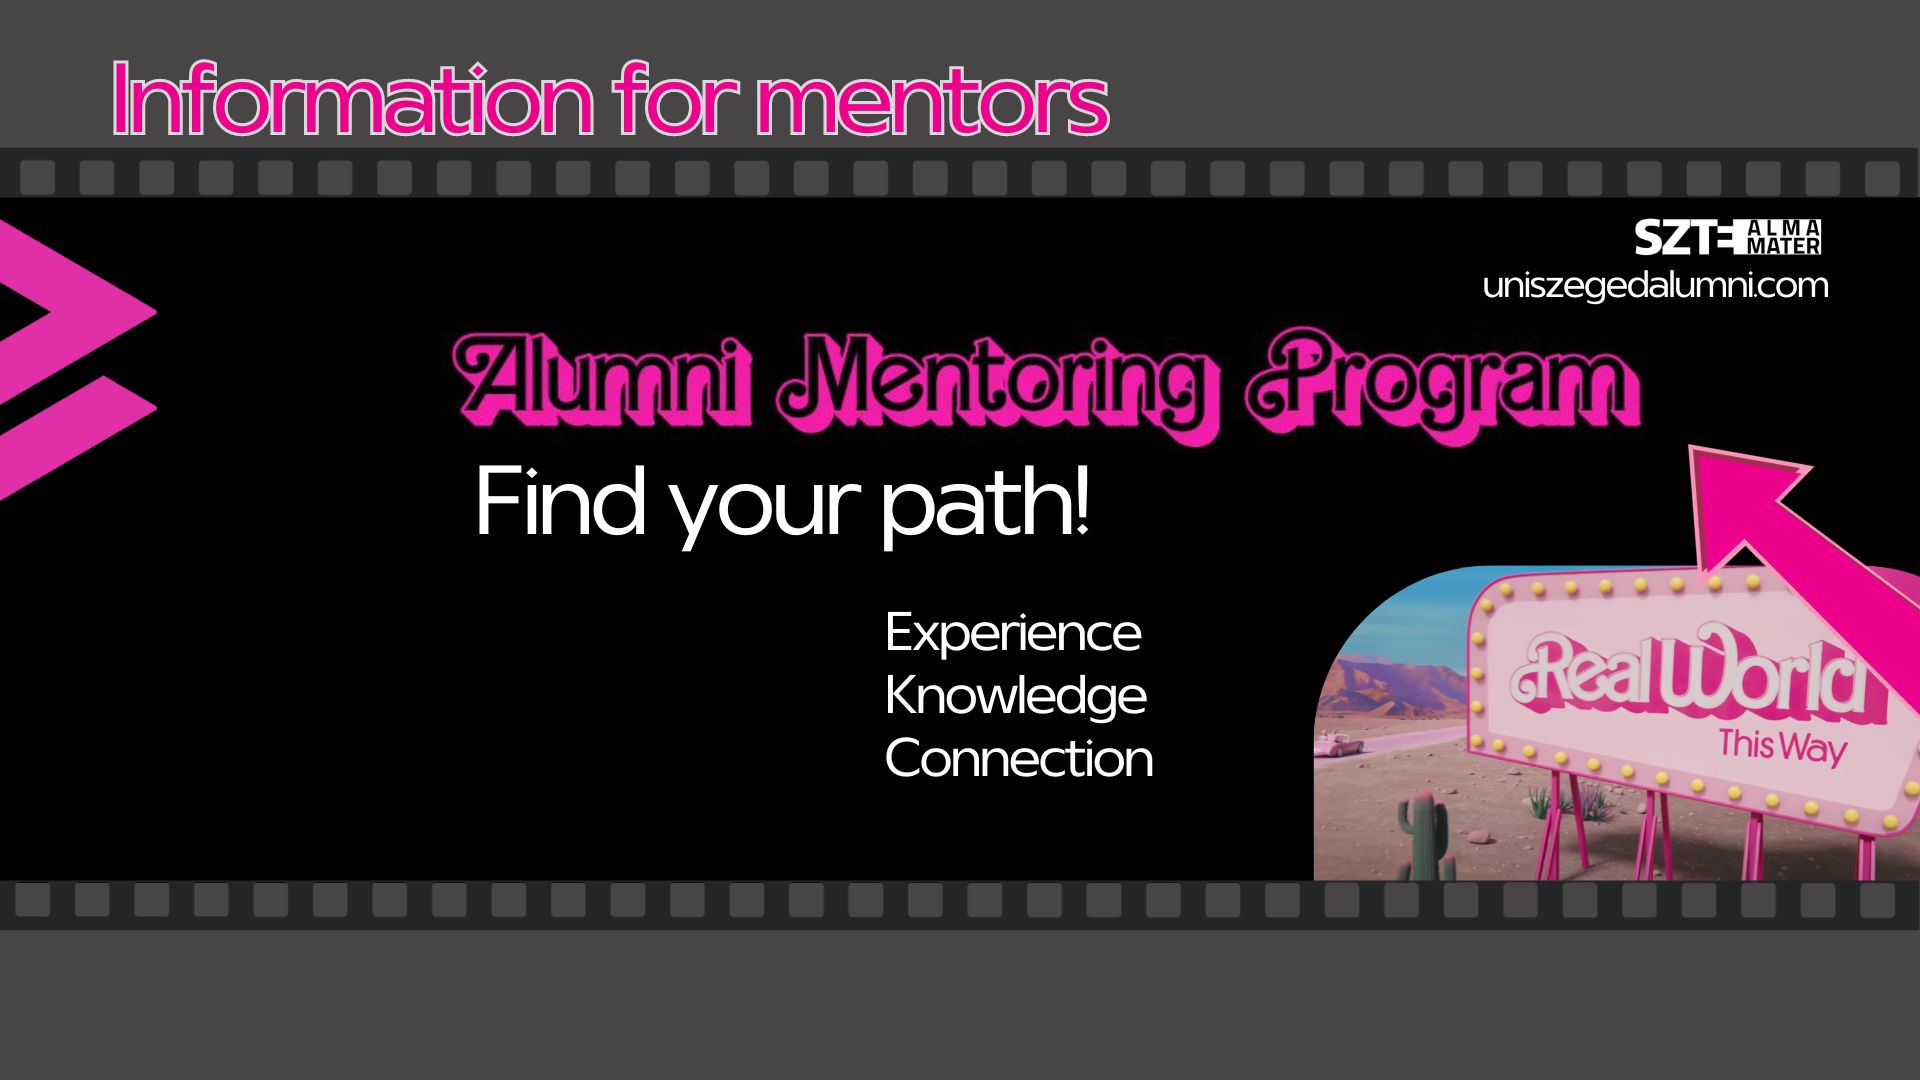 ABOUT MENTORING